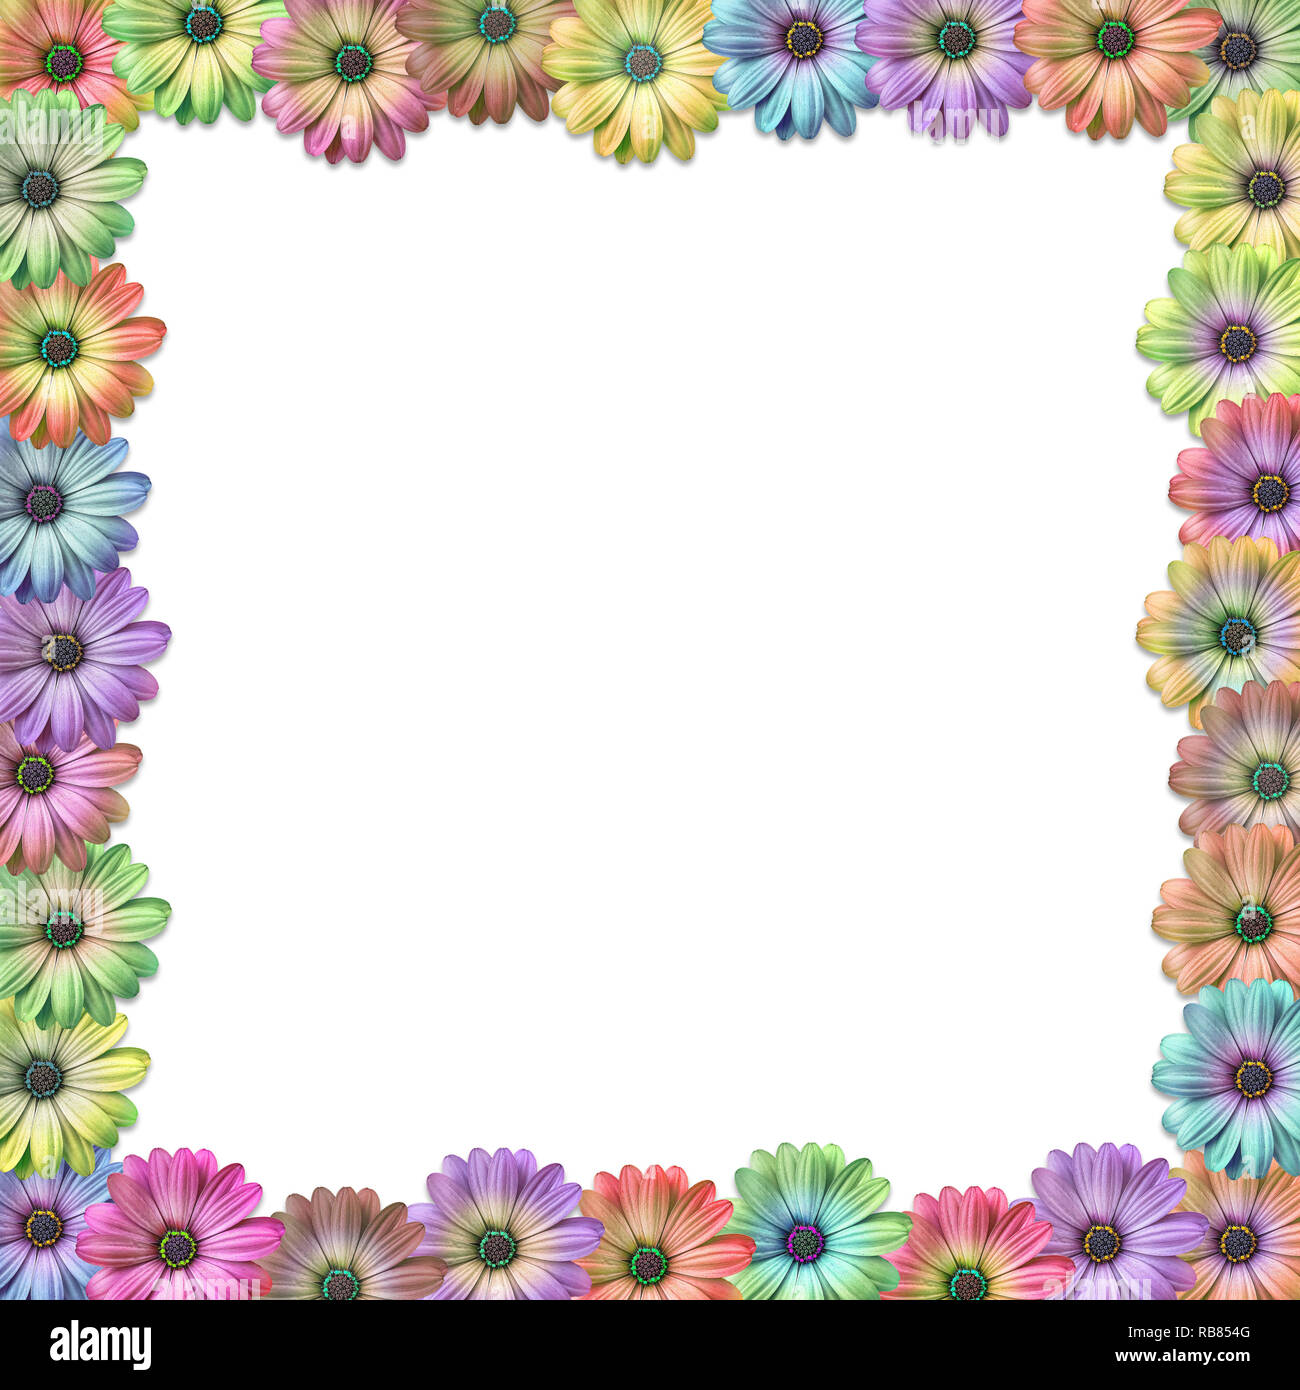 Background with multi colored daisy like flower border background frame Stock Photo